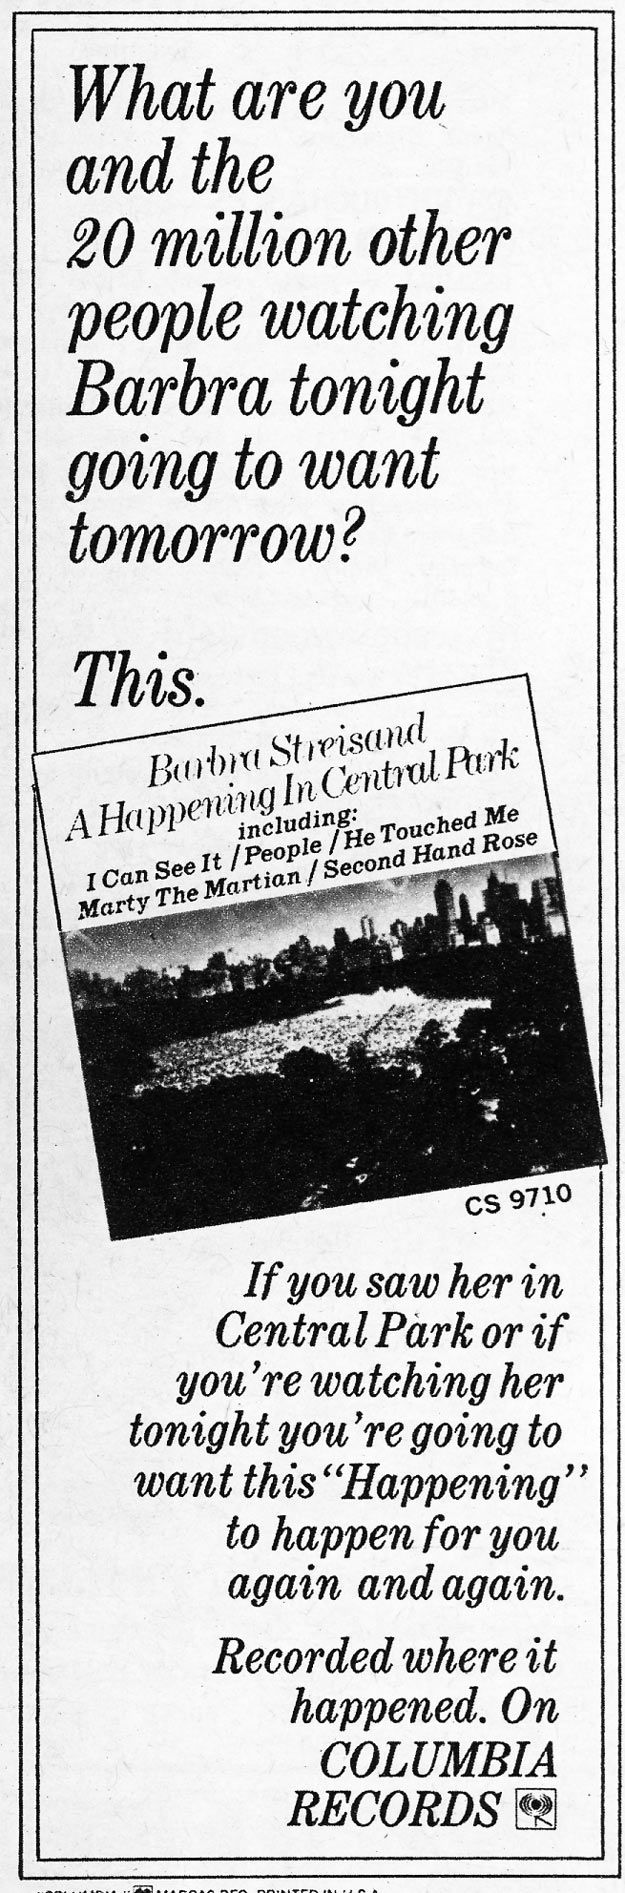 Columbia newspaper ad for Happening in Central Park album.